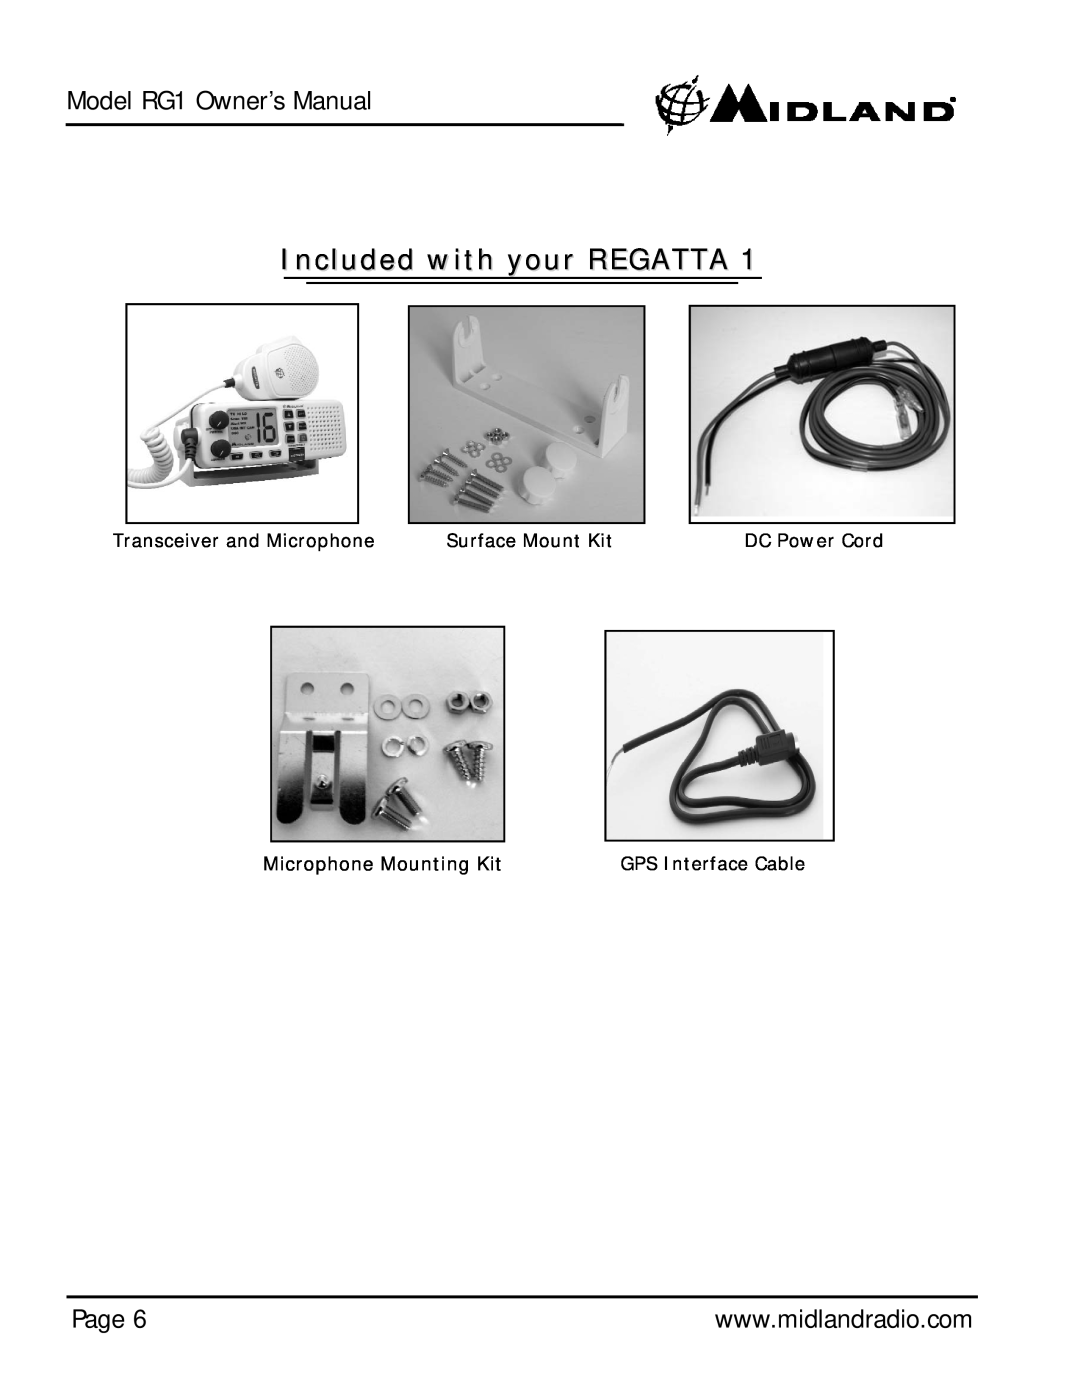 Midland Radio Regatta 1 Included with your REGATTA, Page, Transceiver and Microphone, Surface Mount Kit, DC Power Cord 